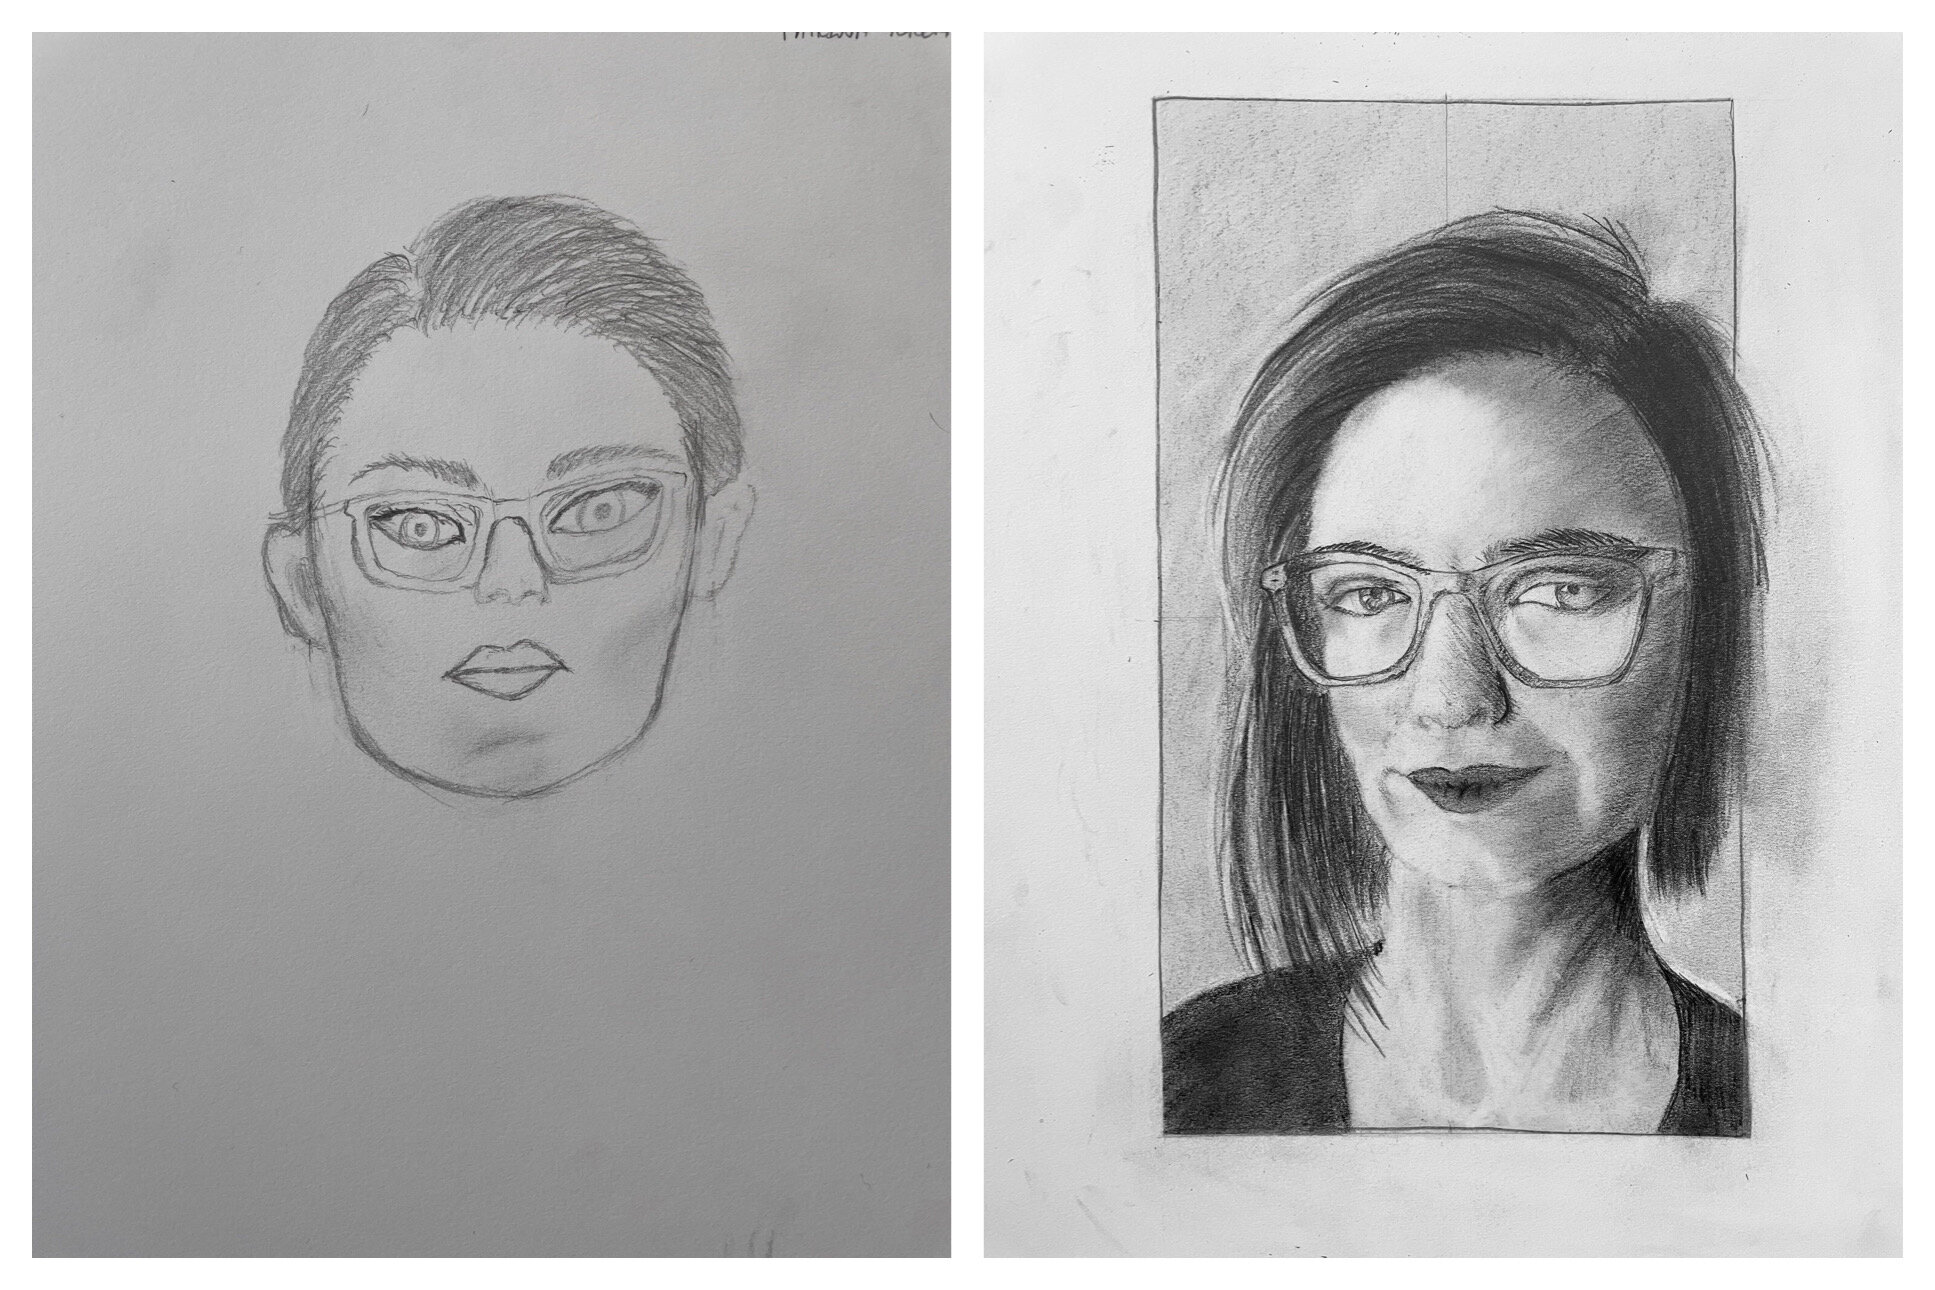 Katrina's Before and After Drawings